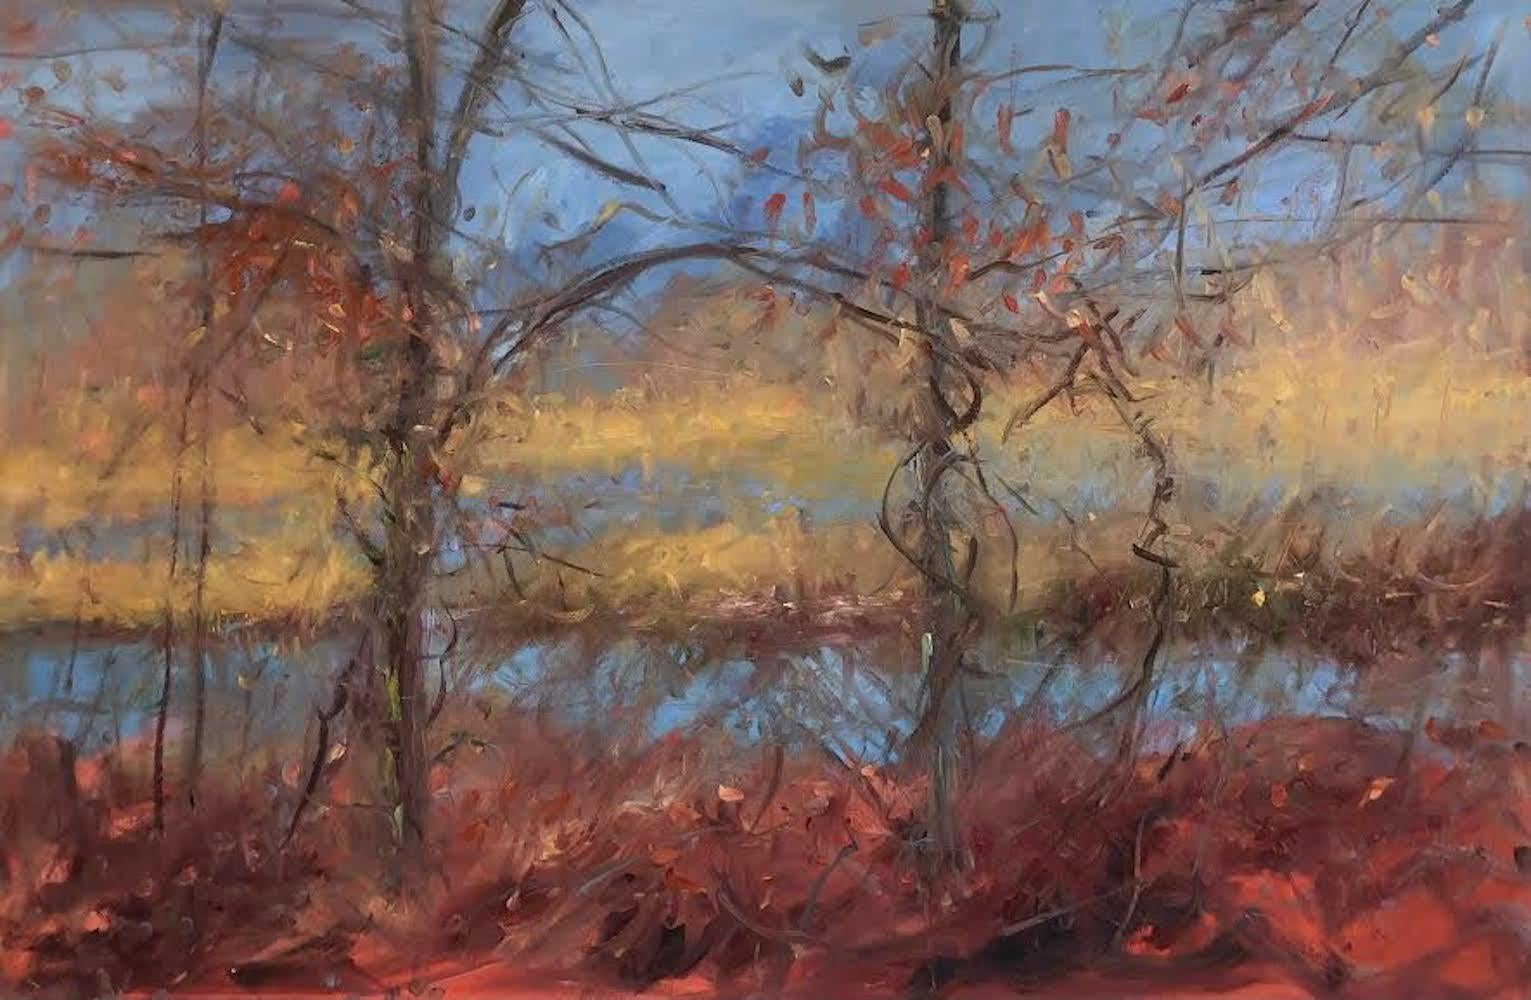 "Remnants of Autumn", landscape, water, browns, oranges, blues, oil painting - Painting by Catherine Picard-Gibbs